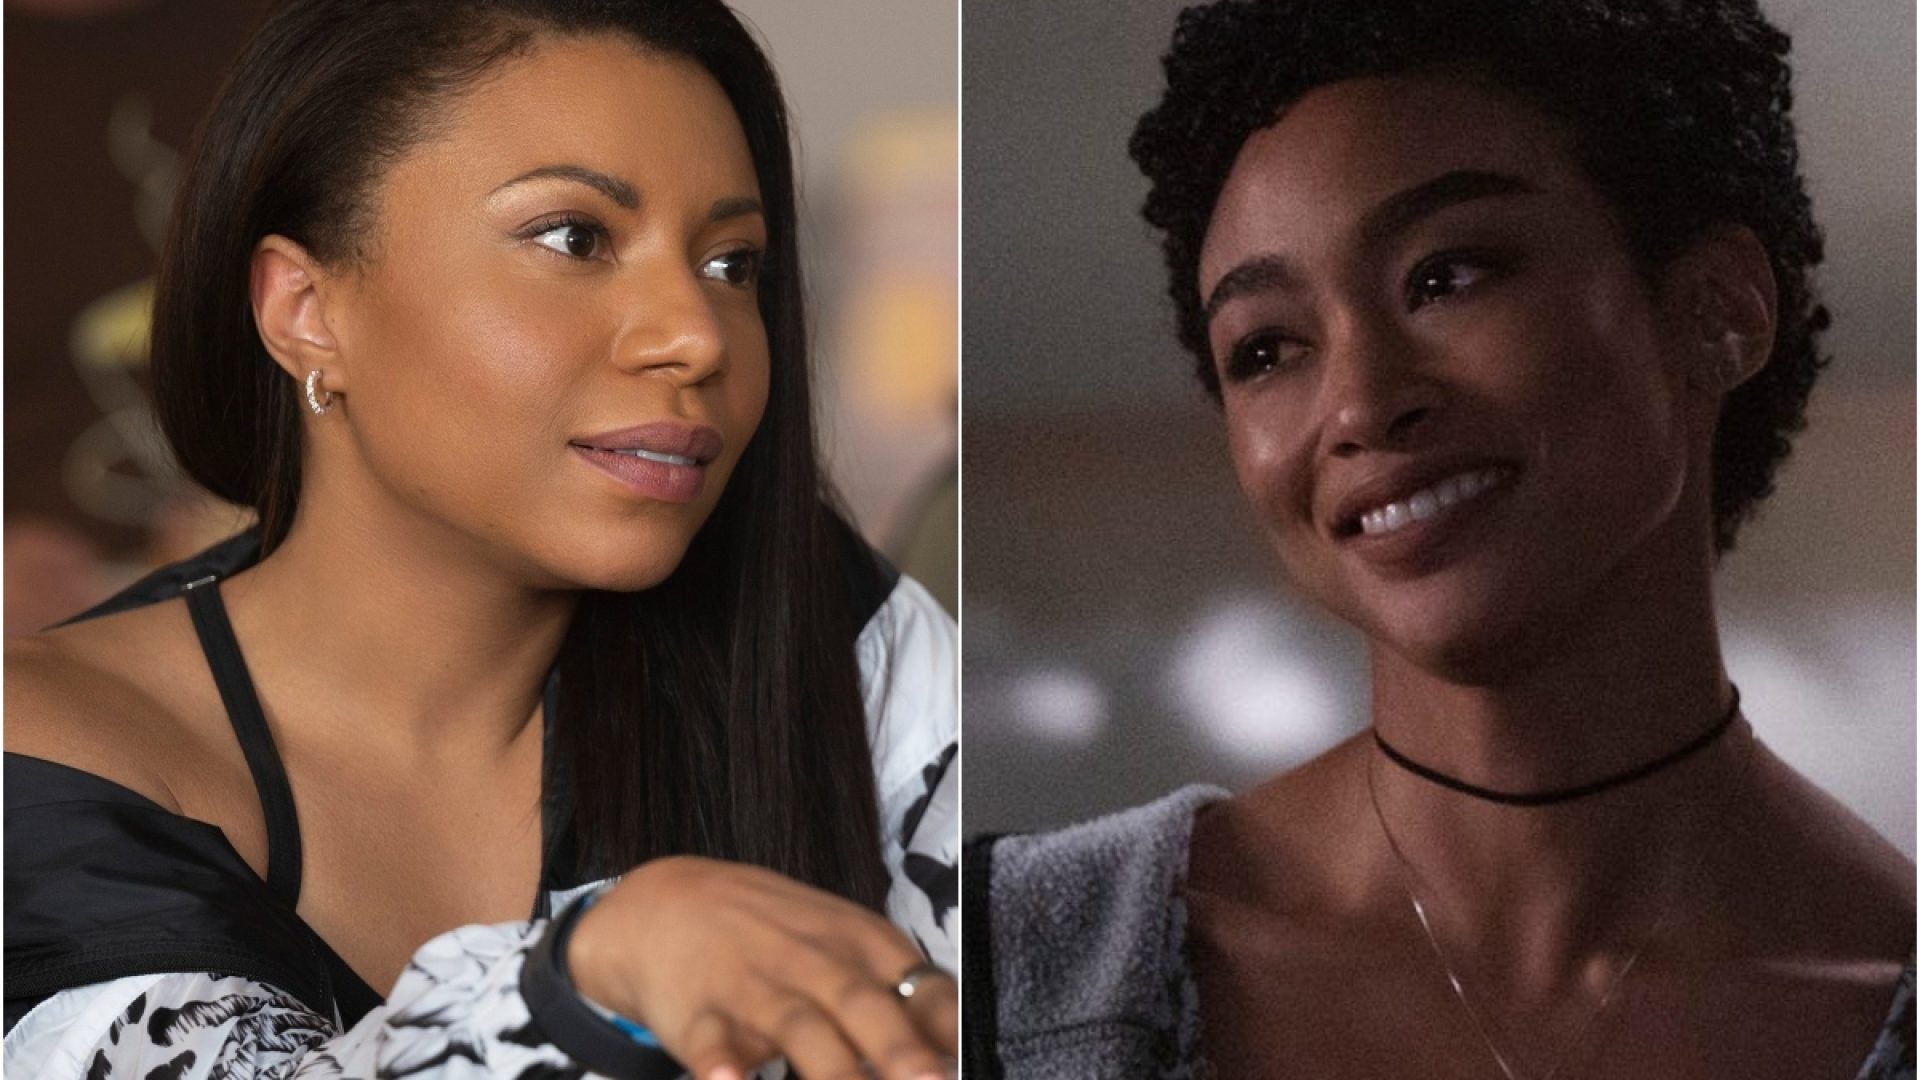 Meet The Black Actresses Shaking Things Up In Season 3 of Netflix's 'You'